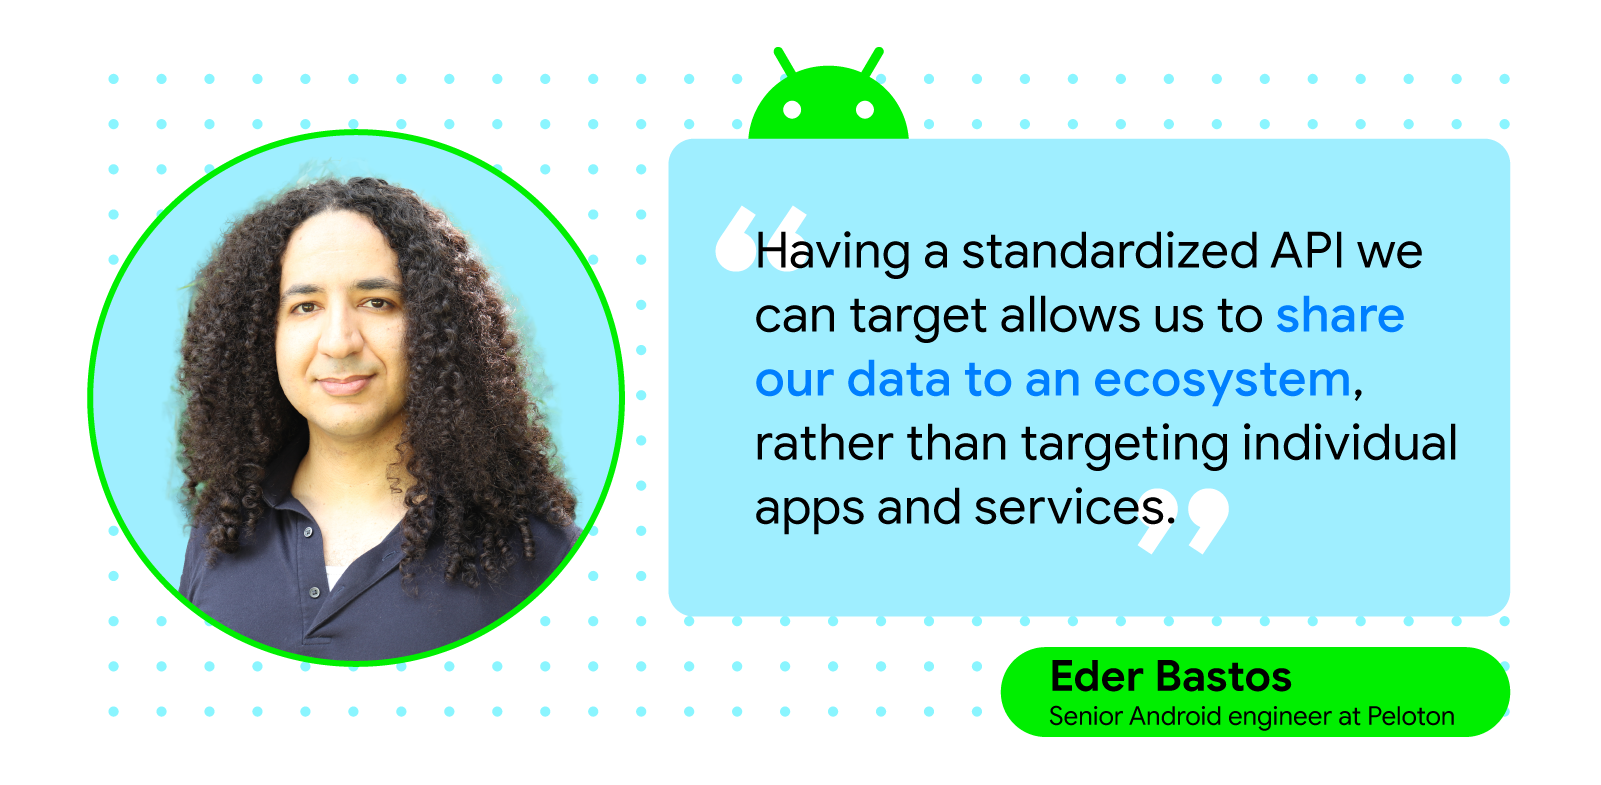 “Having a standardized API we can target allows us to share our data to an ecosystem, rather than targeting individual apps and services.” — Eder Bastos, senior Android engineer at Peloton